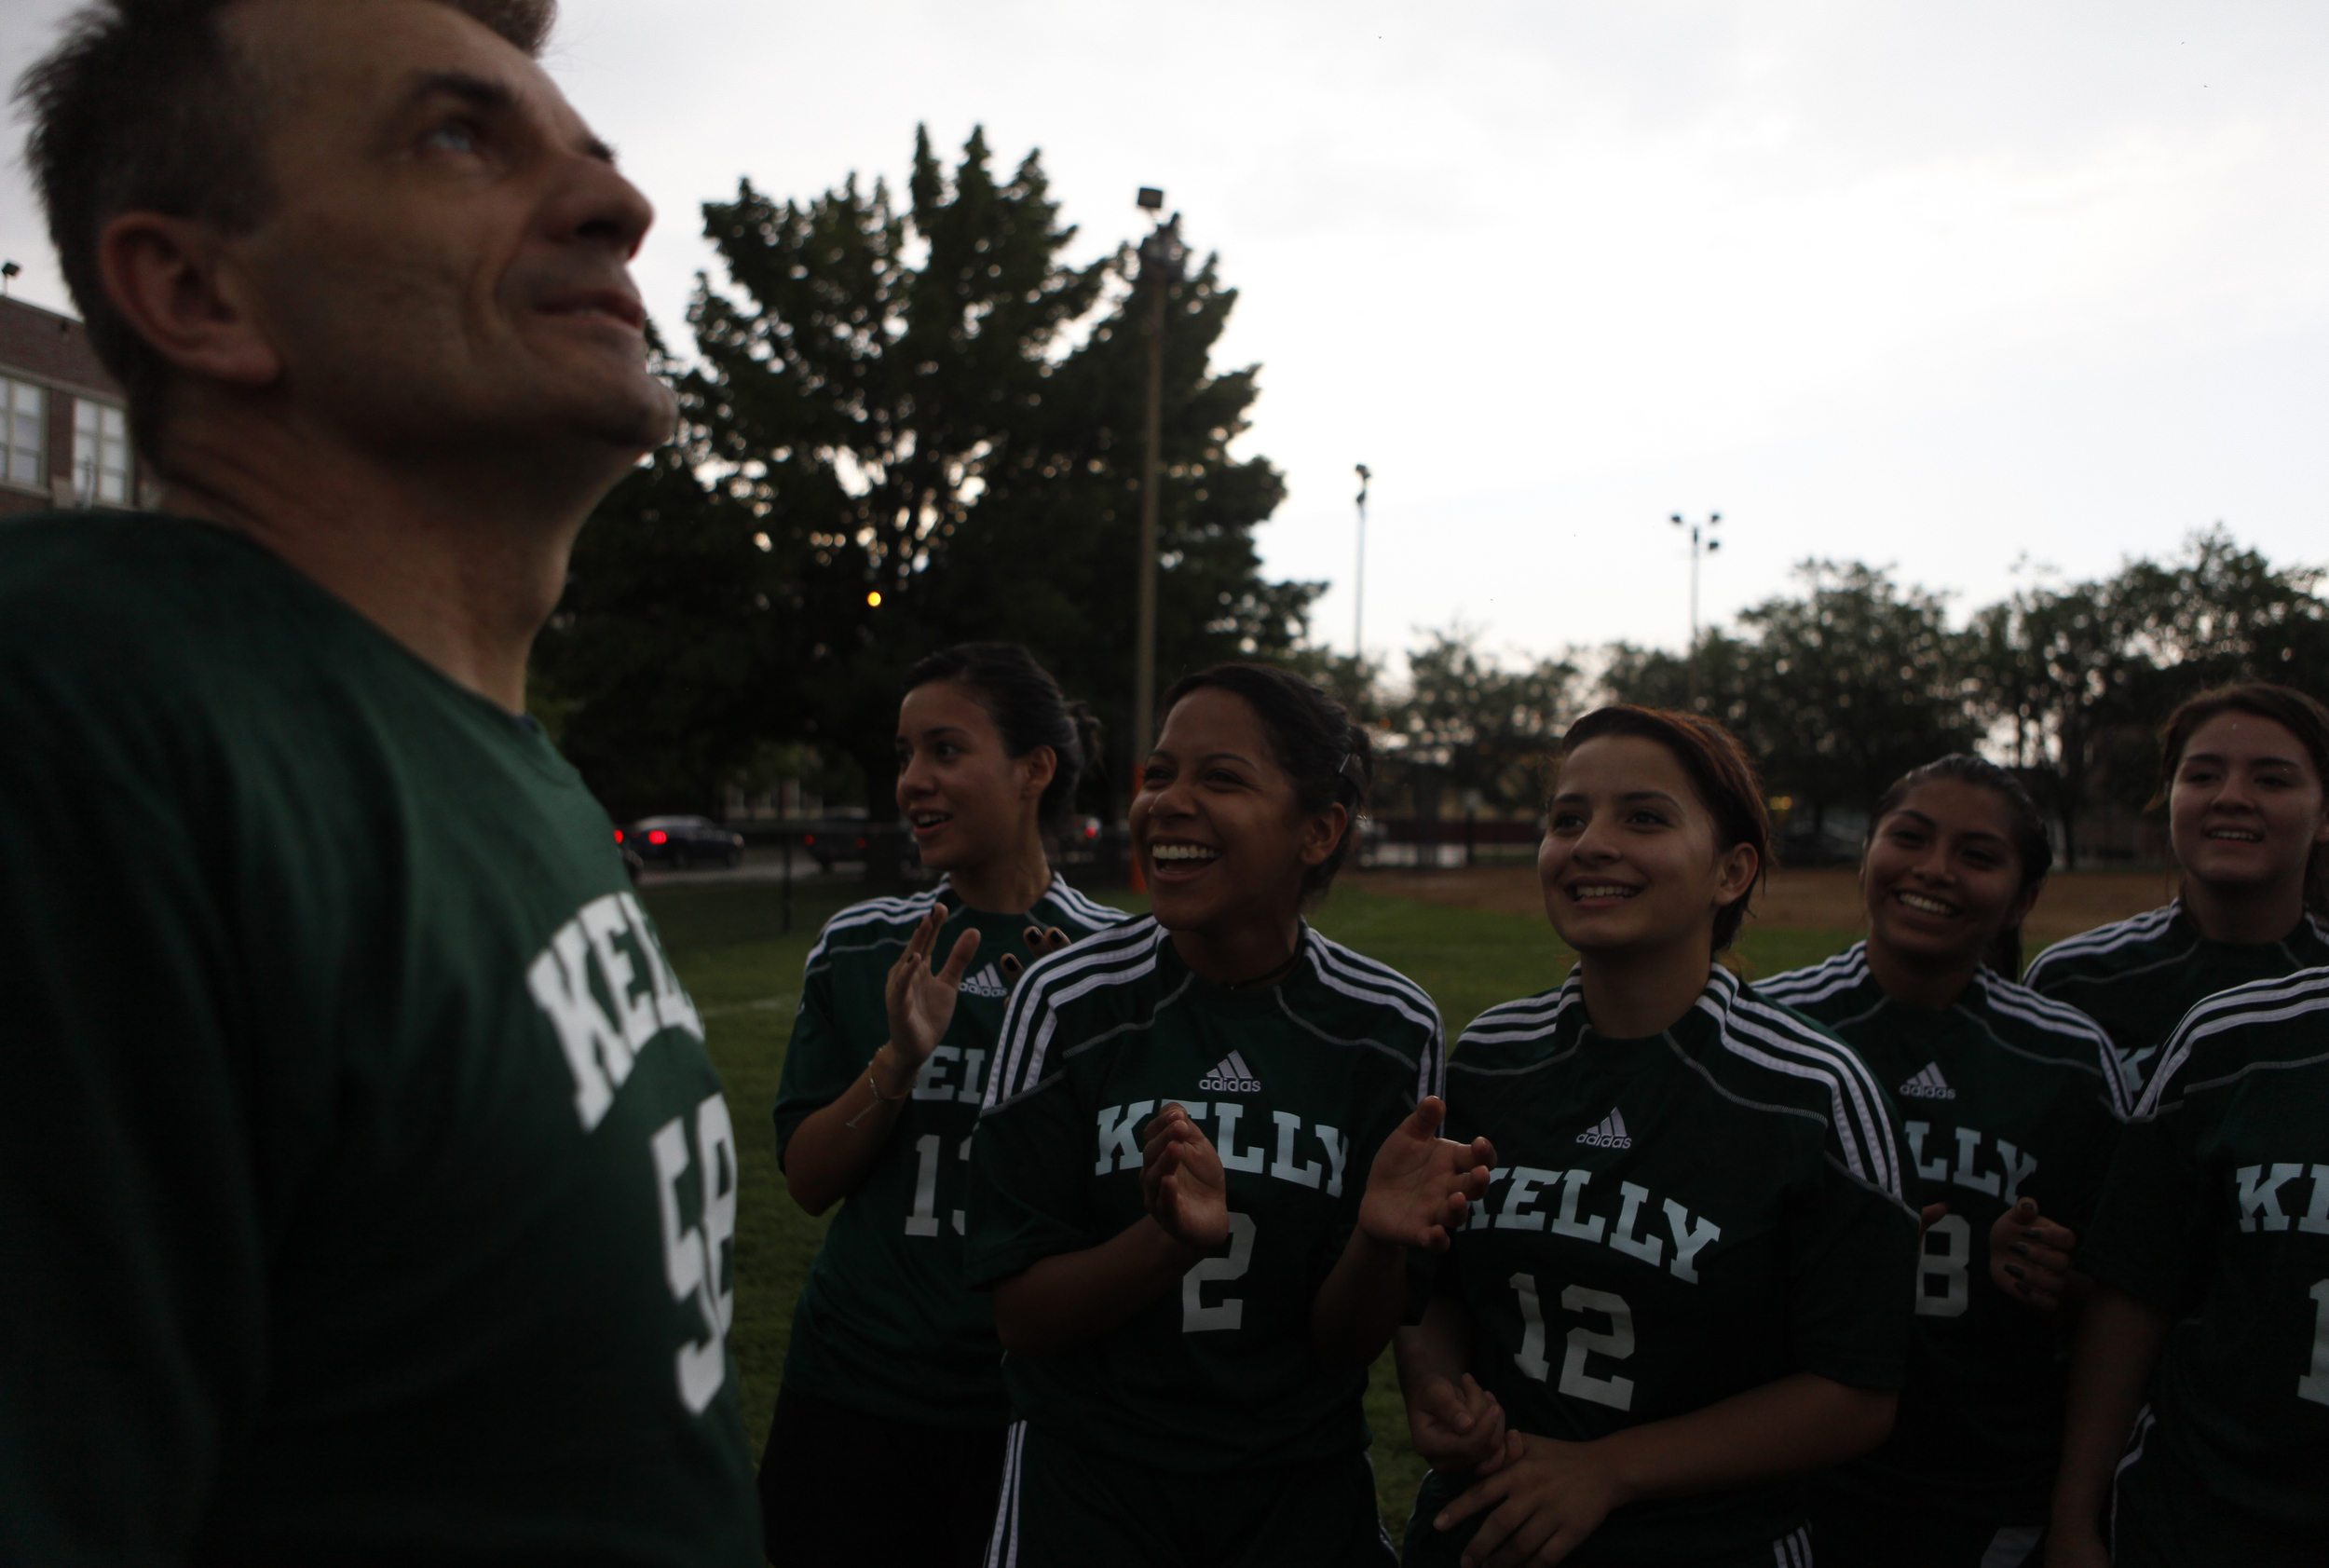  Head Coach Stan Mietus looks up at the stormy sky as the girls chant during practice in front of the Kelly High School in Chicago on Tuesday, June 11, 2013. &nbsp;They were counting the number of seconds after a thunder clap to see if there was goin